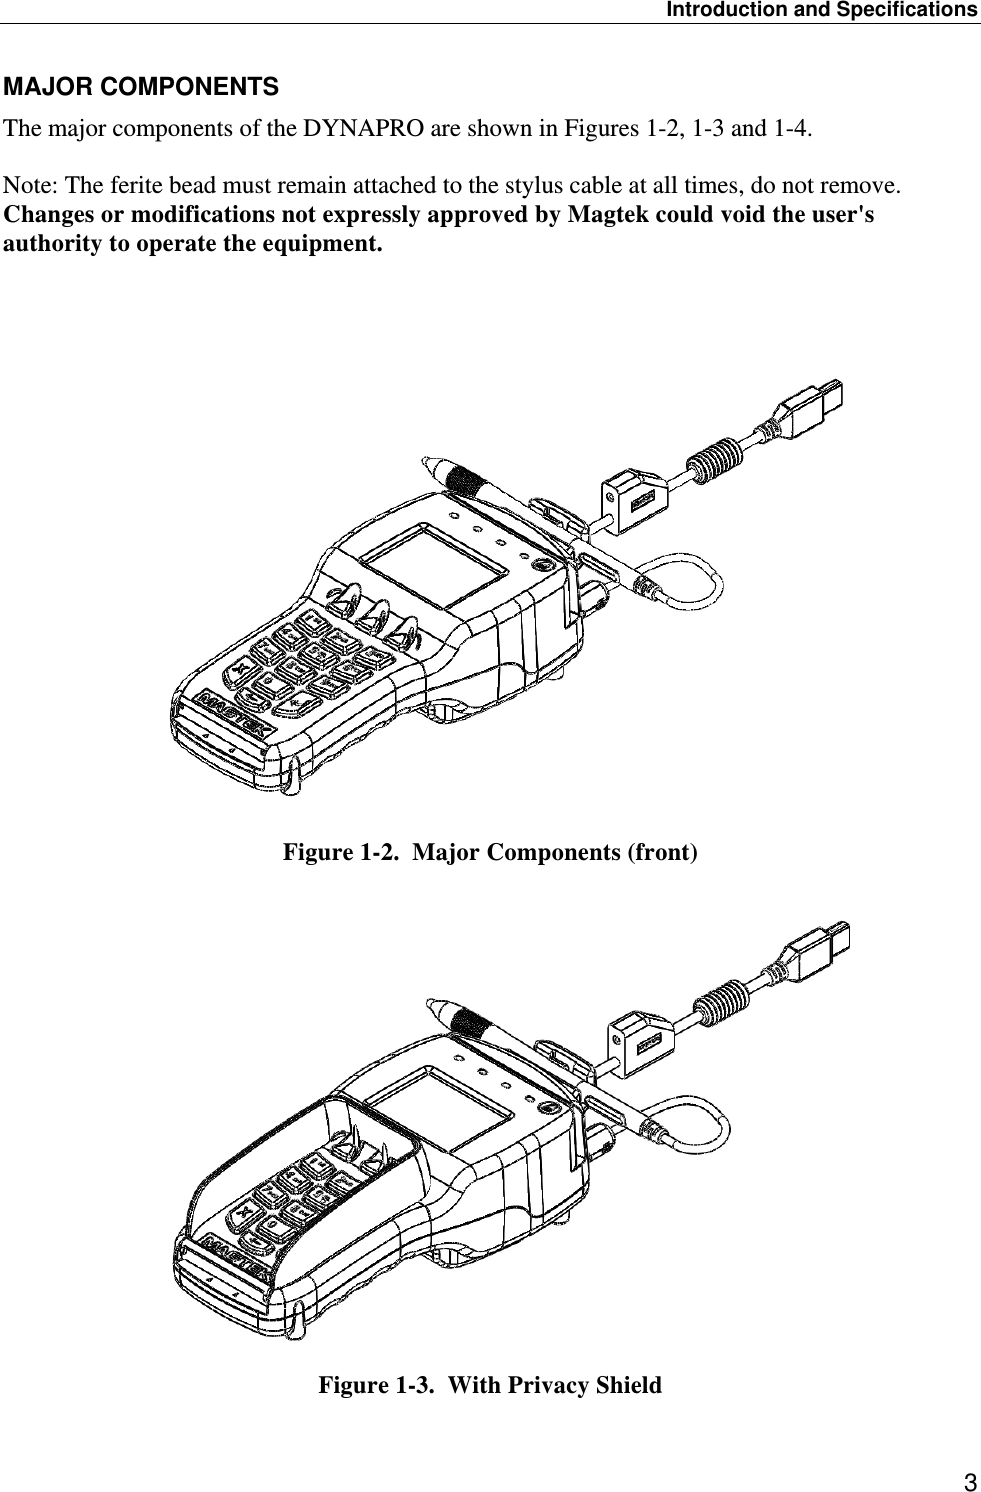 Introduction and Specifications 3 MAJOR COMPONENTS The major components of the DYNAPRO are shown in Figures 1-2, 1-3 and 1-4.   Note: The ferite bead must remain attached to the stylus cable at all times, do not remove. Changes or modifications not expressly approved by Magtek could void the user&apos;s authority to operate the equipment.    Figure 1-2.  Major Components (front)   Figure 1-3.  With Privacy Shield 